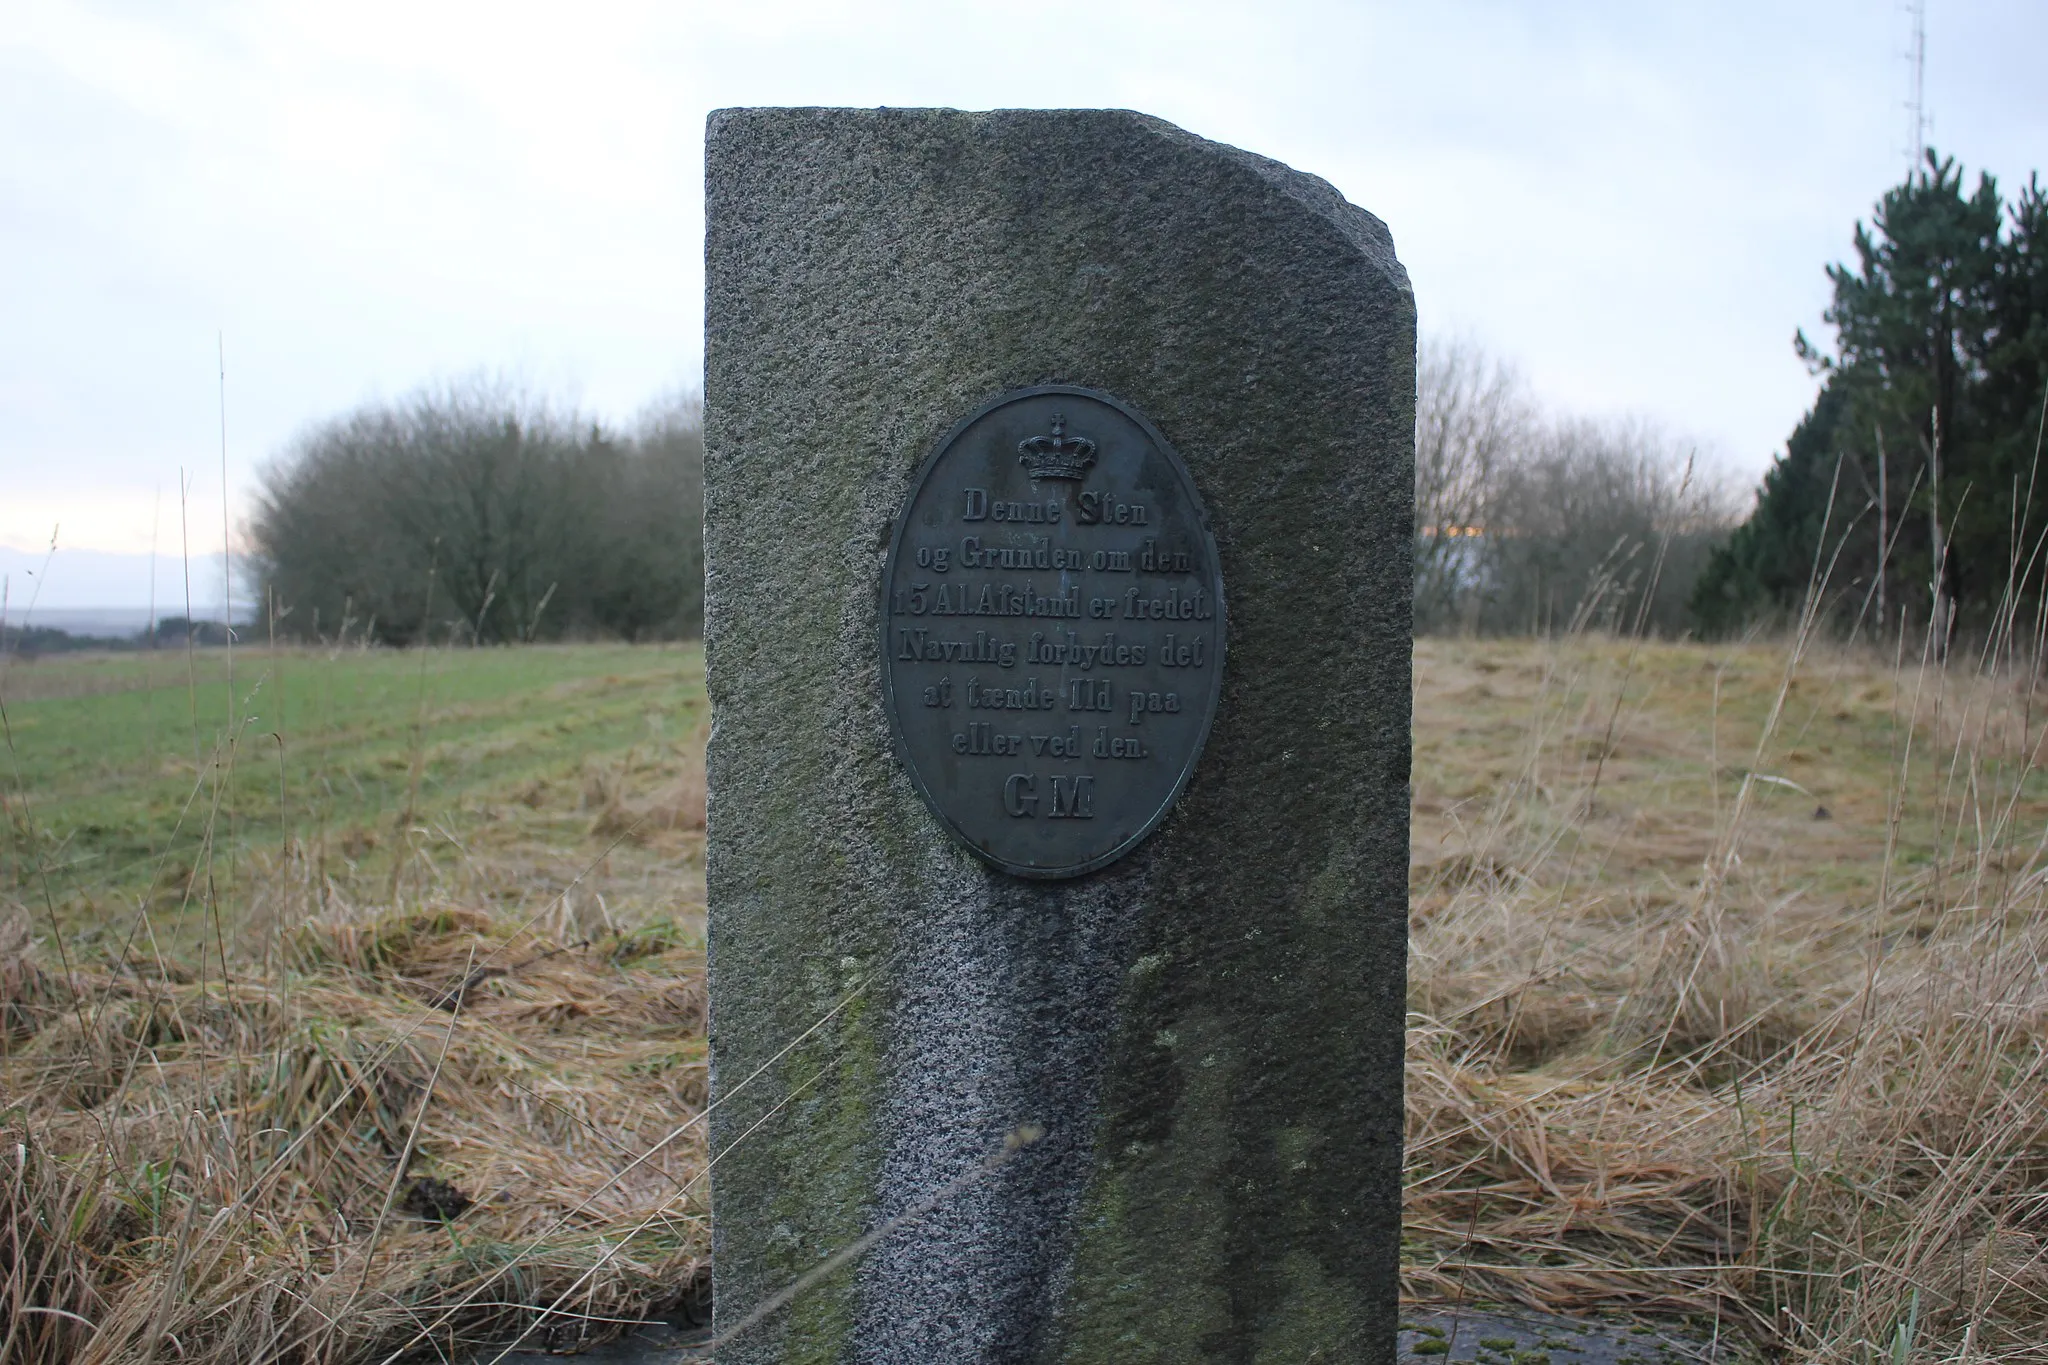 Photo showing: Reference point marker in Denmark. The plate on the stone states that "This stone and the area surrounding it for a distance of 3m is protected. Specifically it is forbidden to light a fire on or near [the stone]. [Signed] GM". The length is written on the stone as "5 Al", which is 5 Danish Ells (alen), roughly the equivalent of 3 meters. "GM" is the signature for the organisation "Graadmaalingen", which was the name of the Danish Geodata Agency between 1816 and 1842.